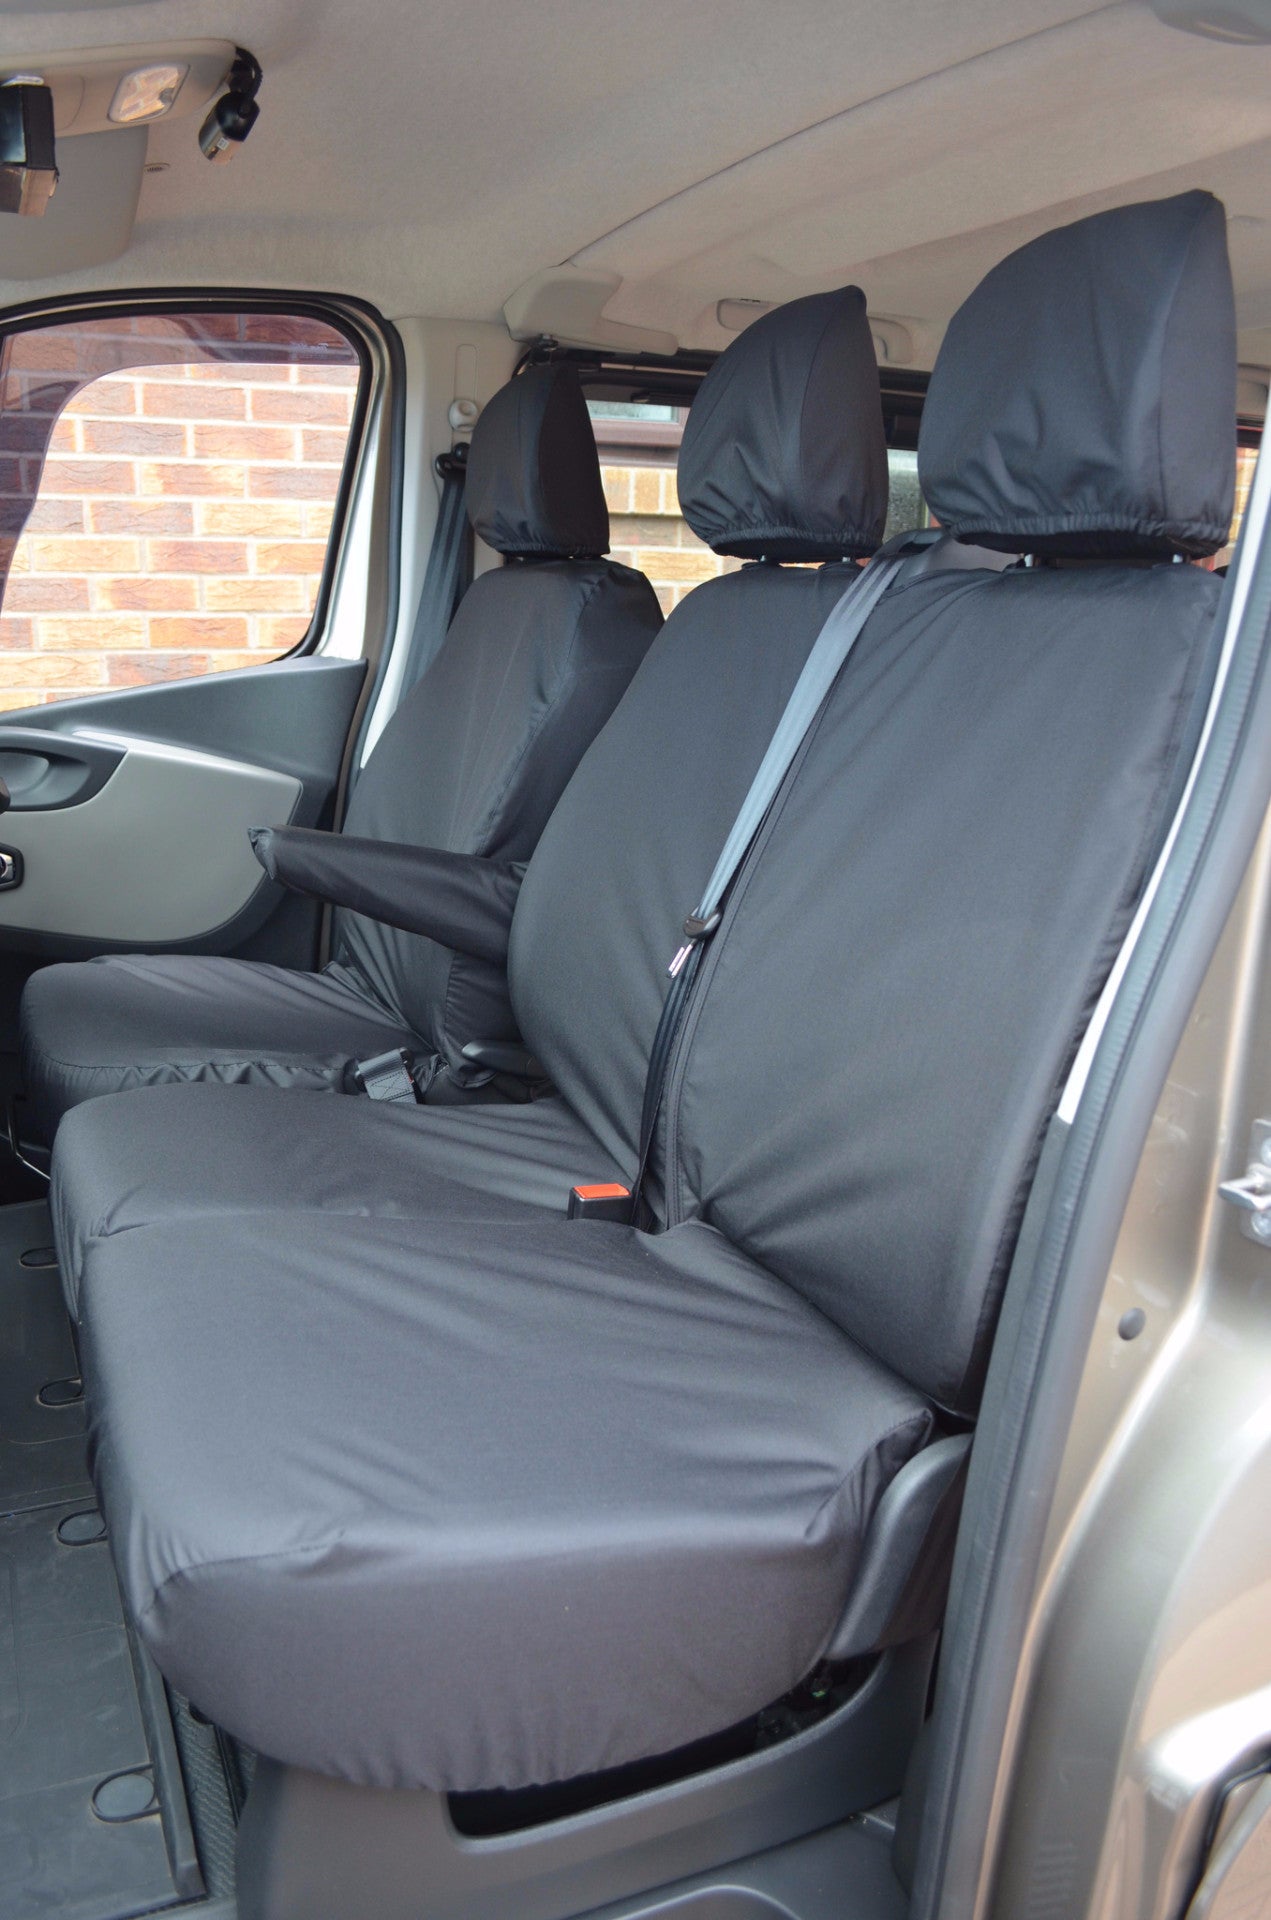 Nissan NV300 2016+ 9-Seater Minibus Seat Covers  Turtle Covers Ltd